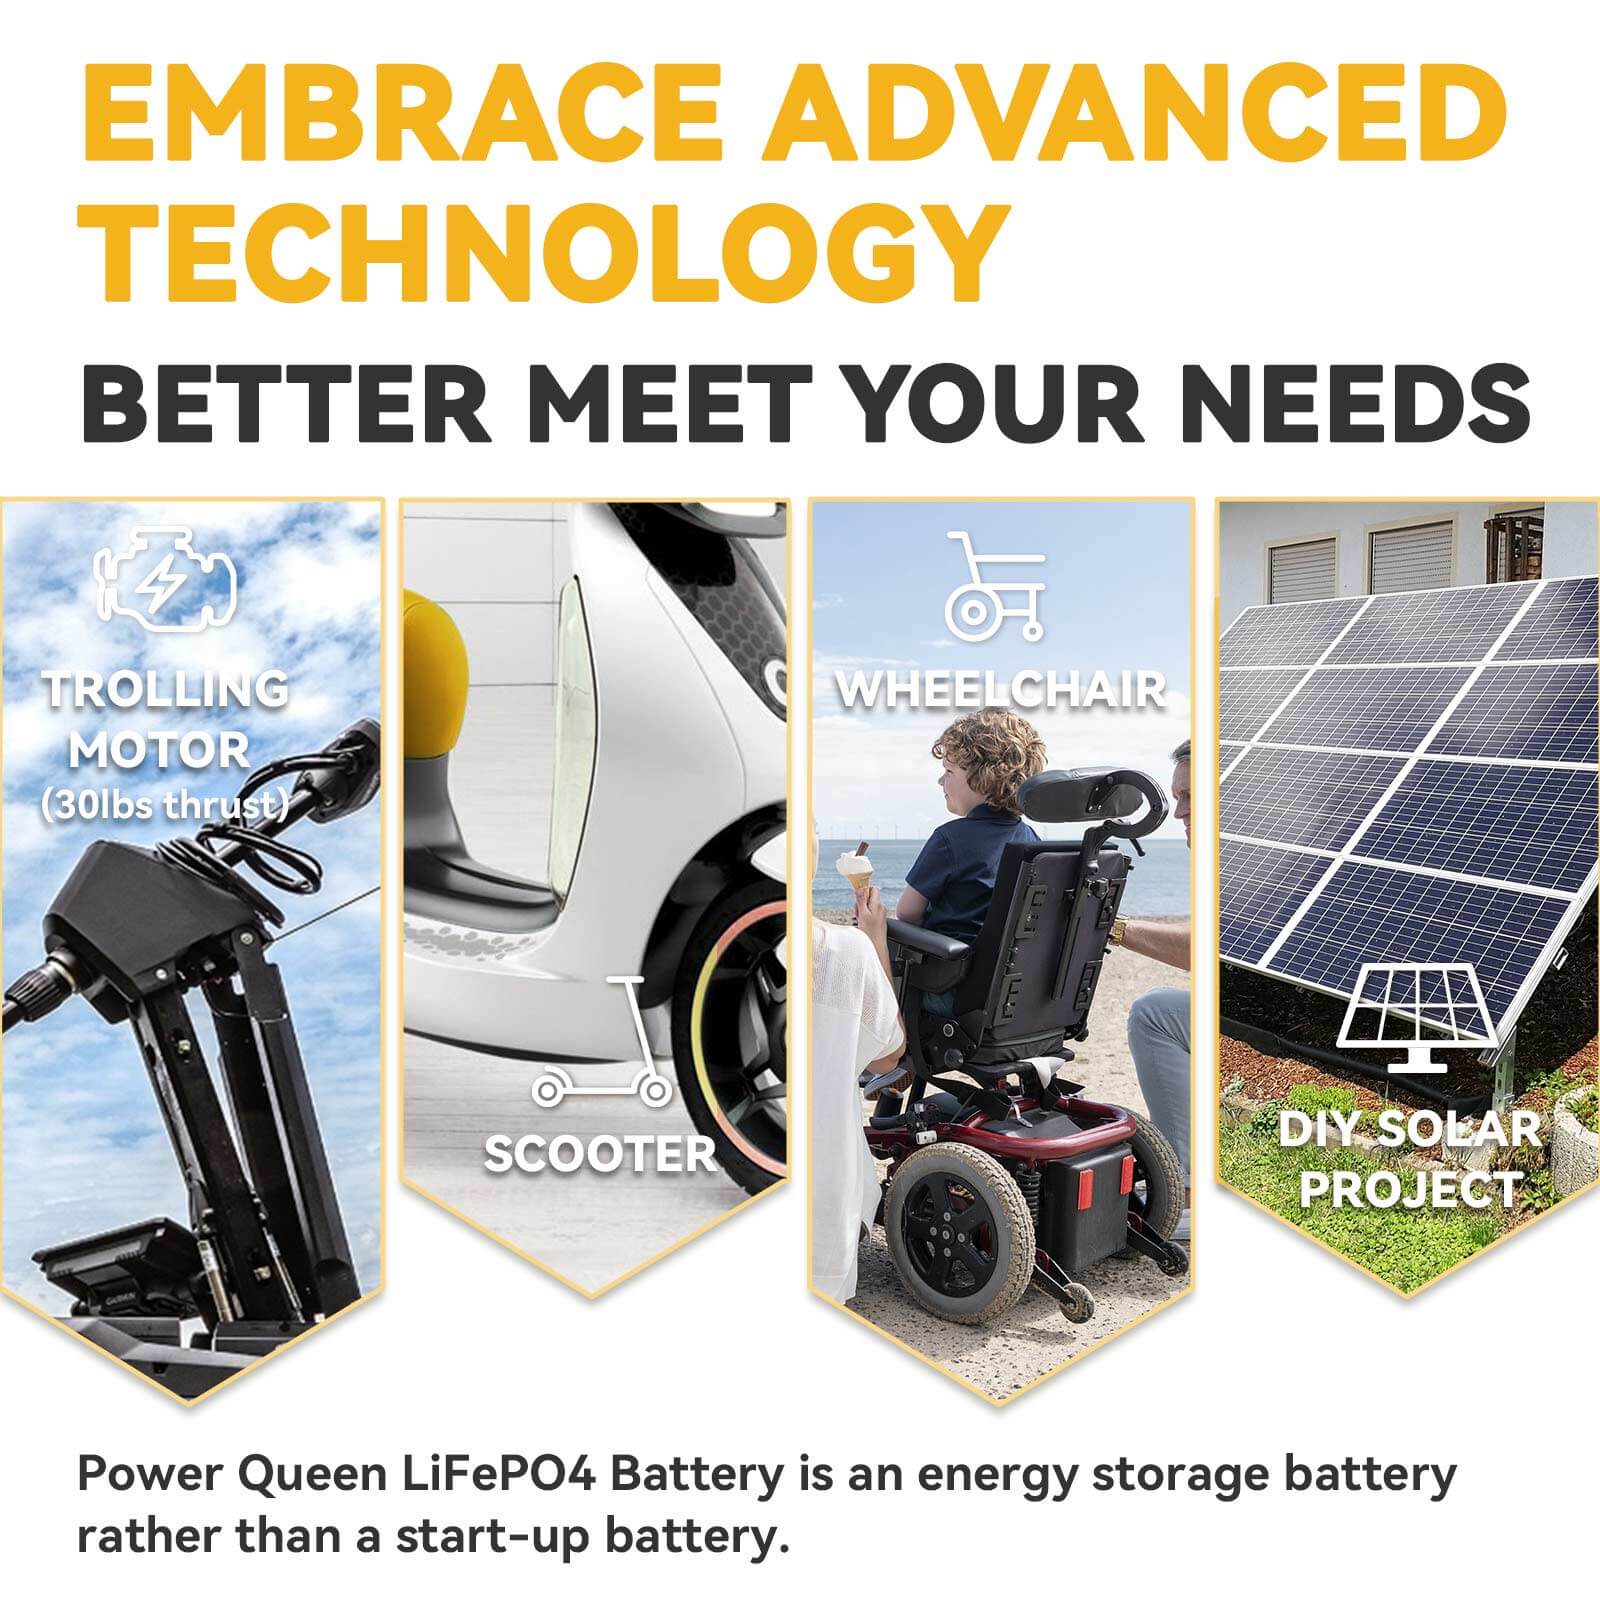 Power Queen 12V 50Ah LiFePO4 Battery + 14.6V 10A Charger